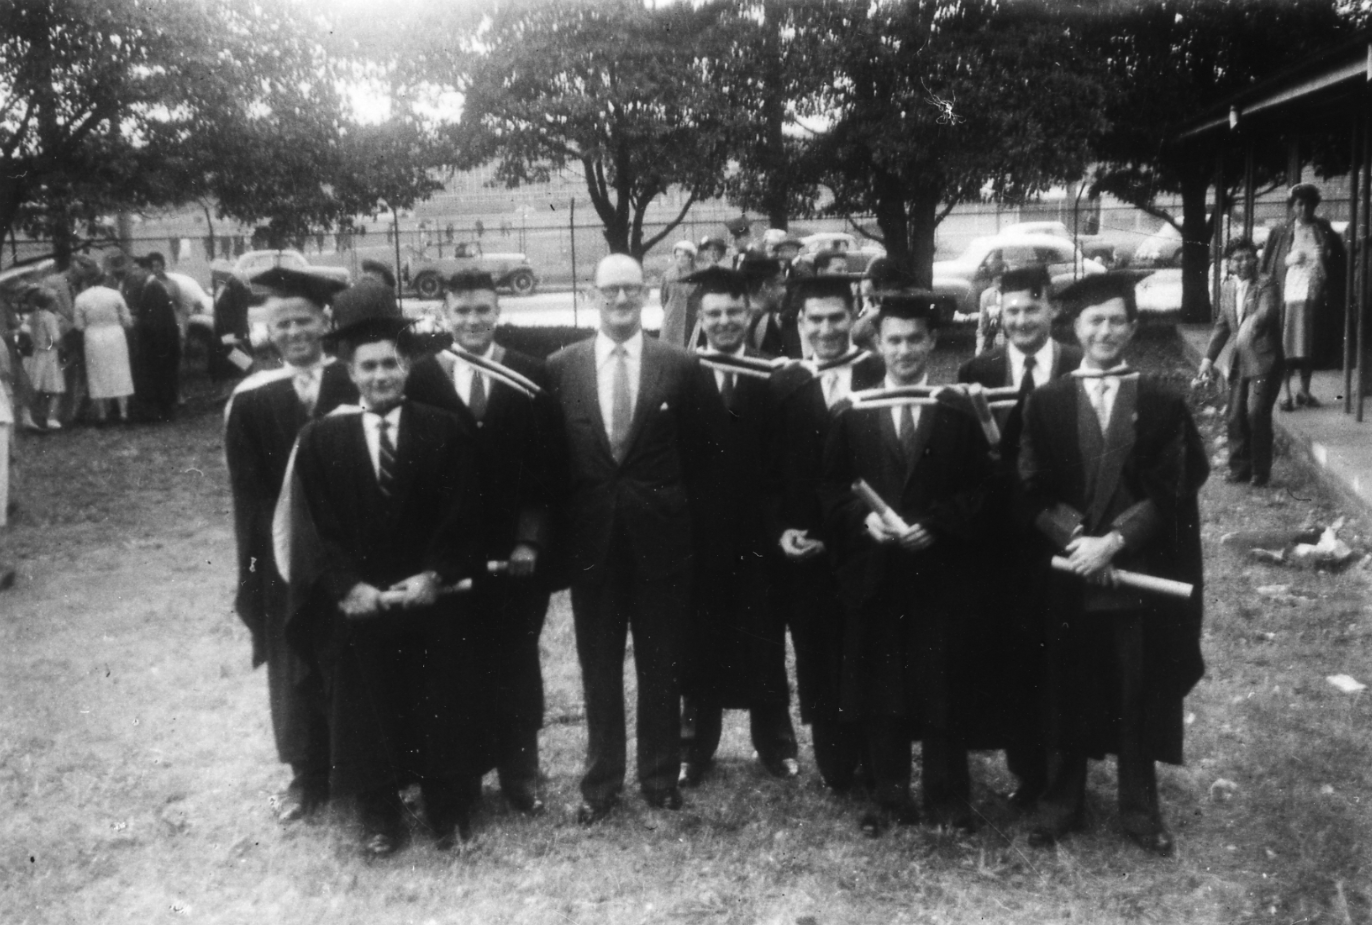 Langer Edward Avery (second from the right) and his Commerce cohort with Professor E. B. Smyth after their 1959 graduation ceremony